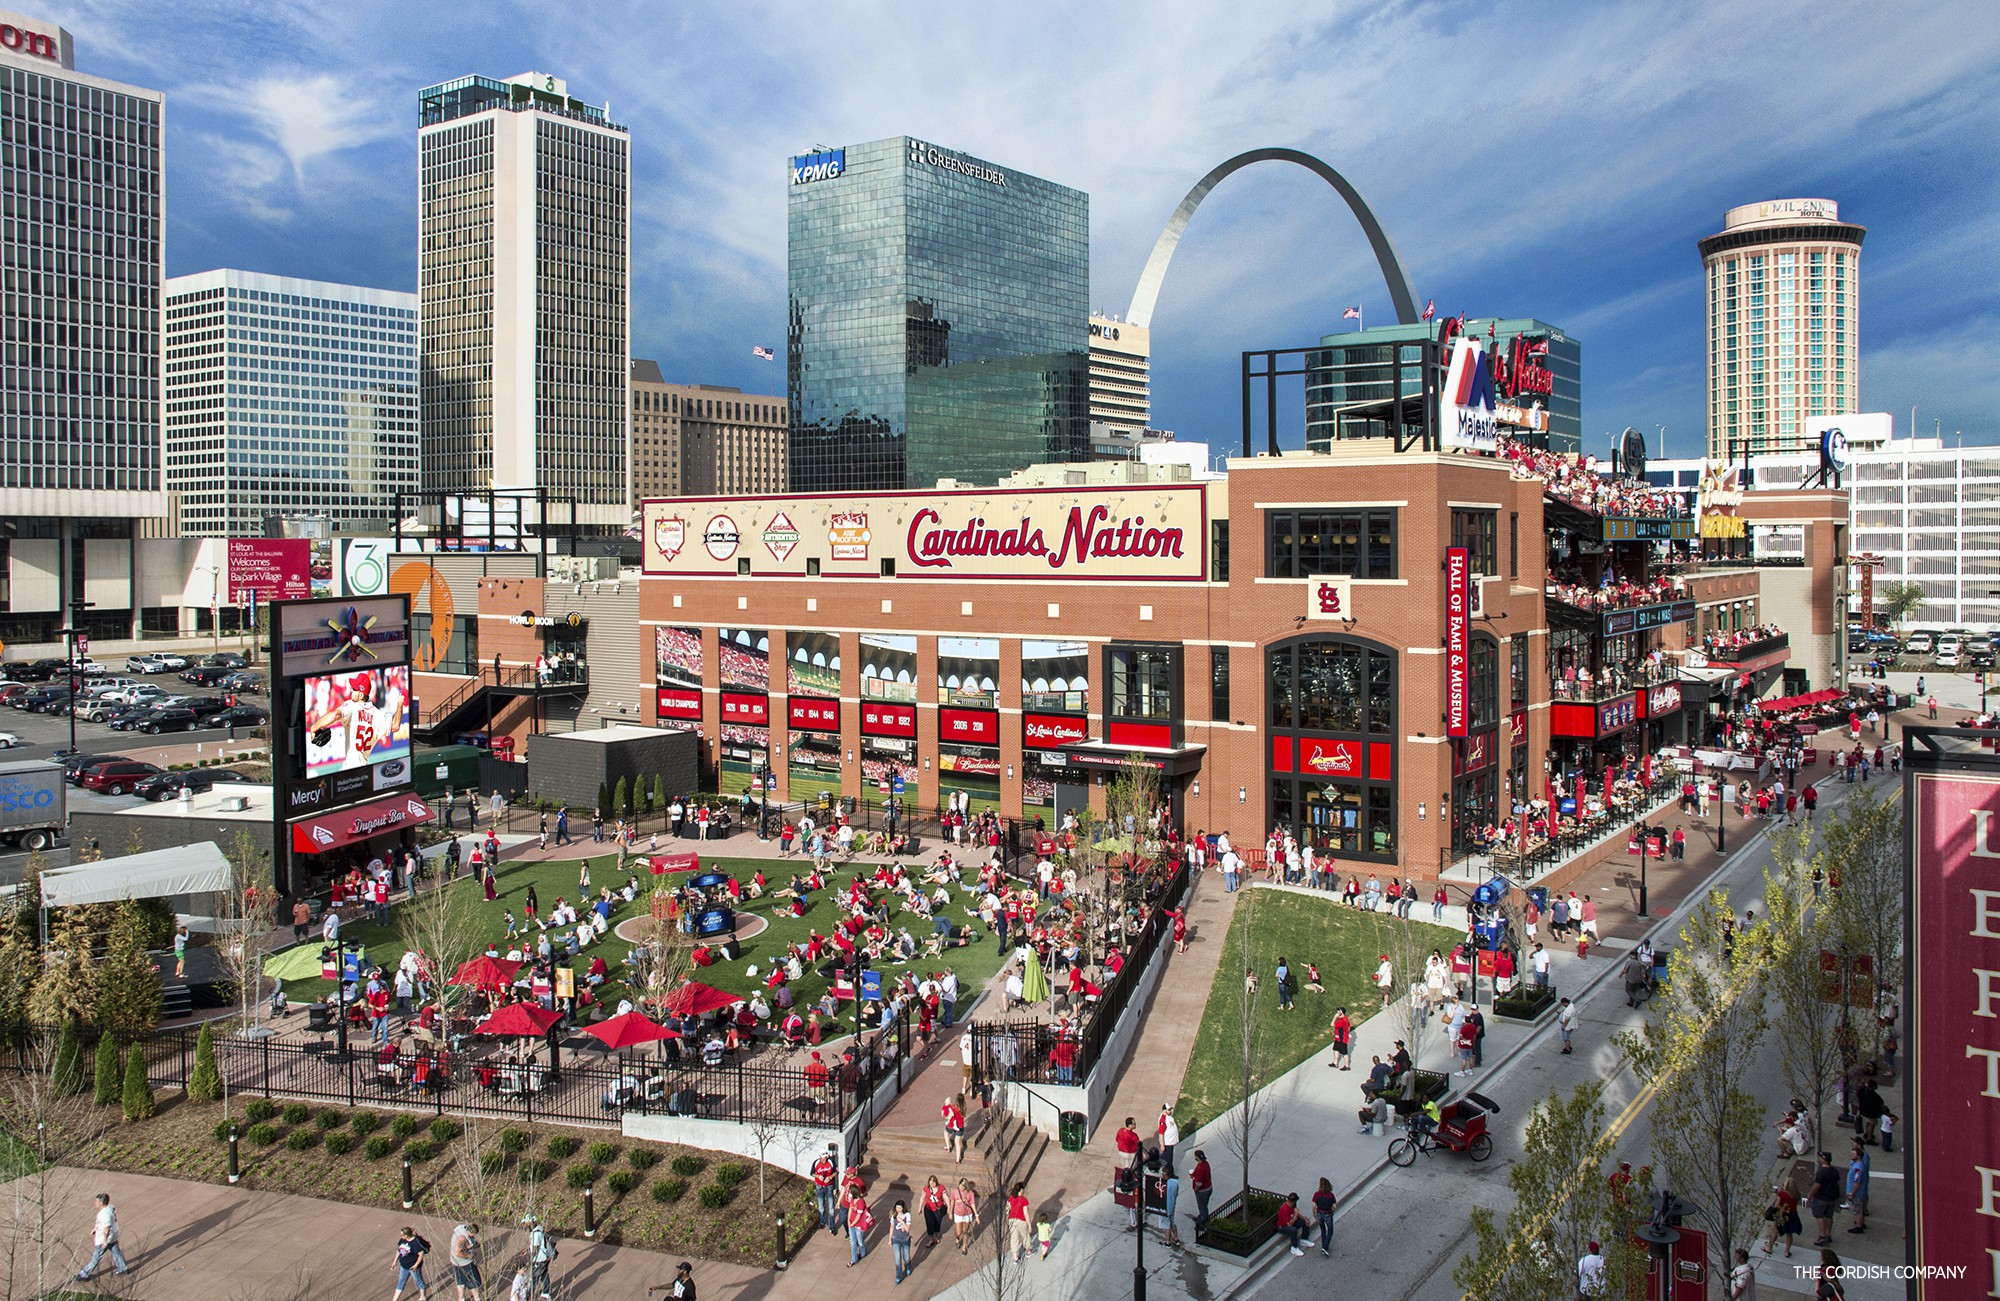 Ballpark Village Showcases Expanded Gameday Viewing, Dining and Retail Opportunities Ahead of Cardinals 2021 Season ArchCitydia